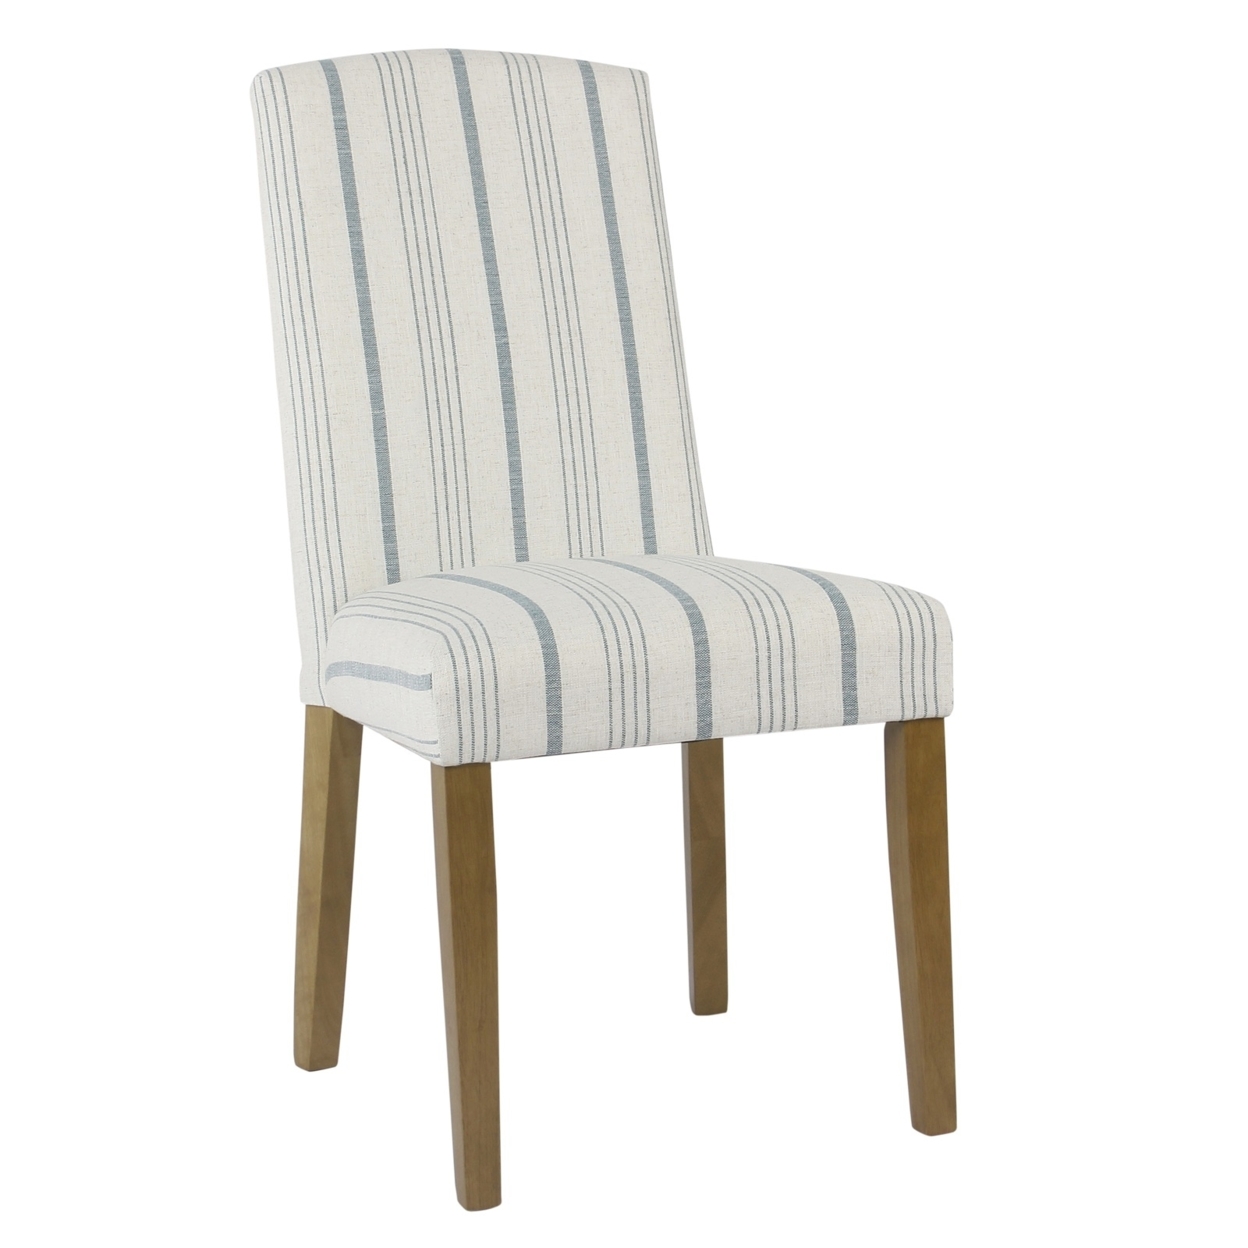 Wooden Dining Chairs With Stripe Pattern Fabric Upholstery, Blue And White, Set Of Two- Saltoro Sherpi